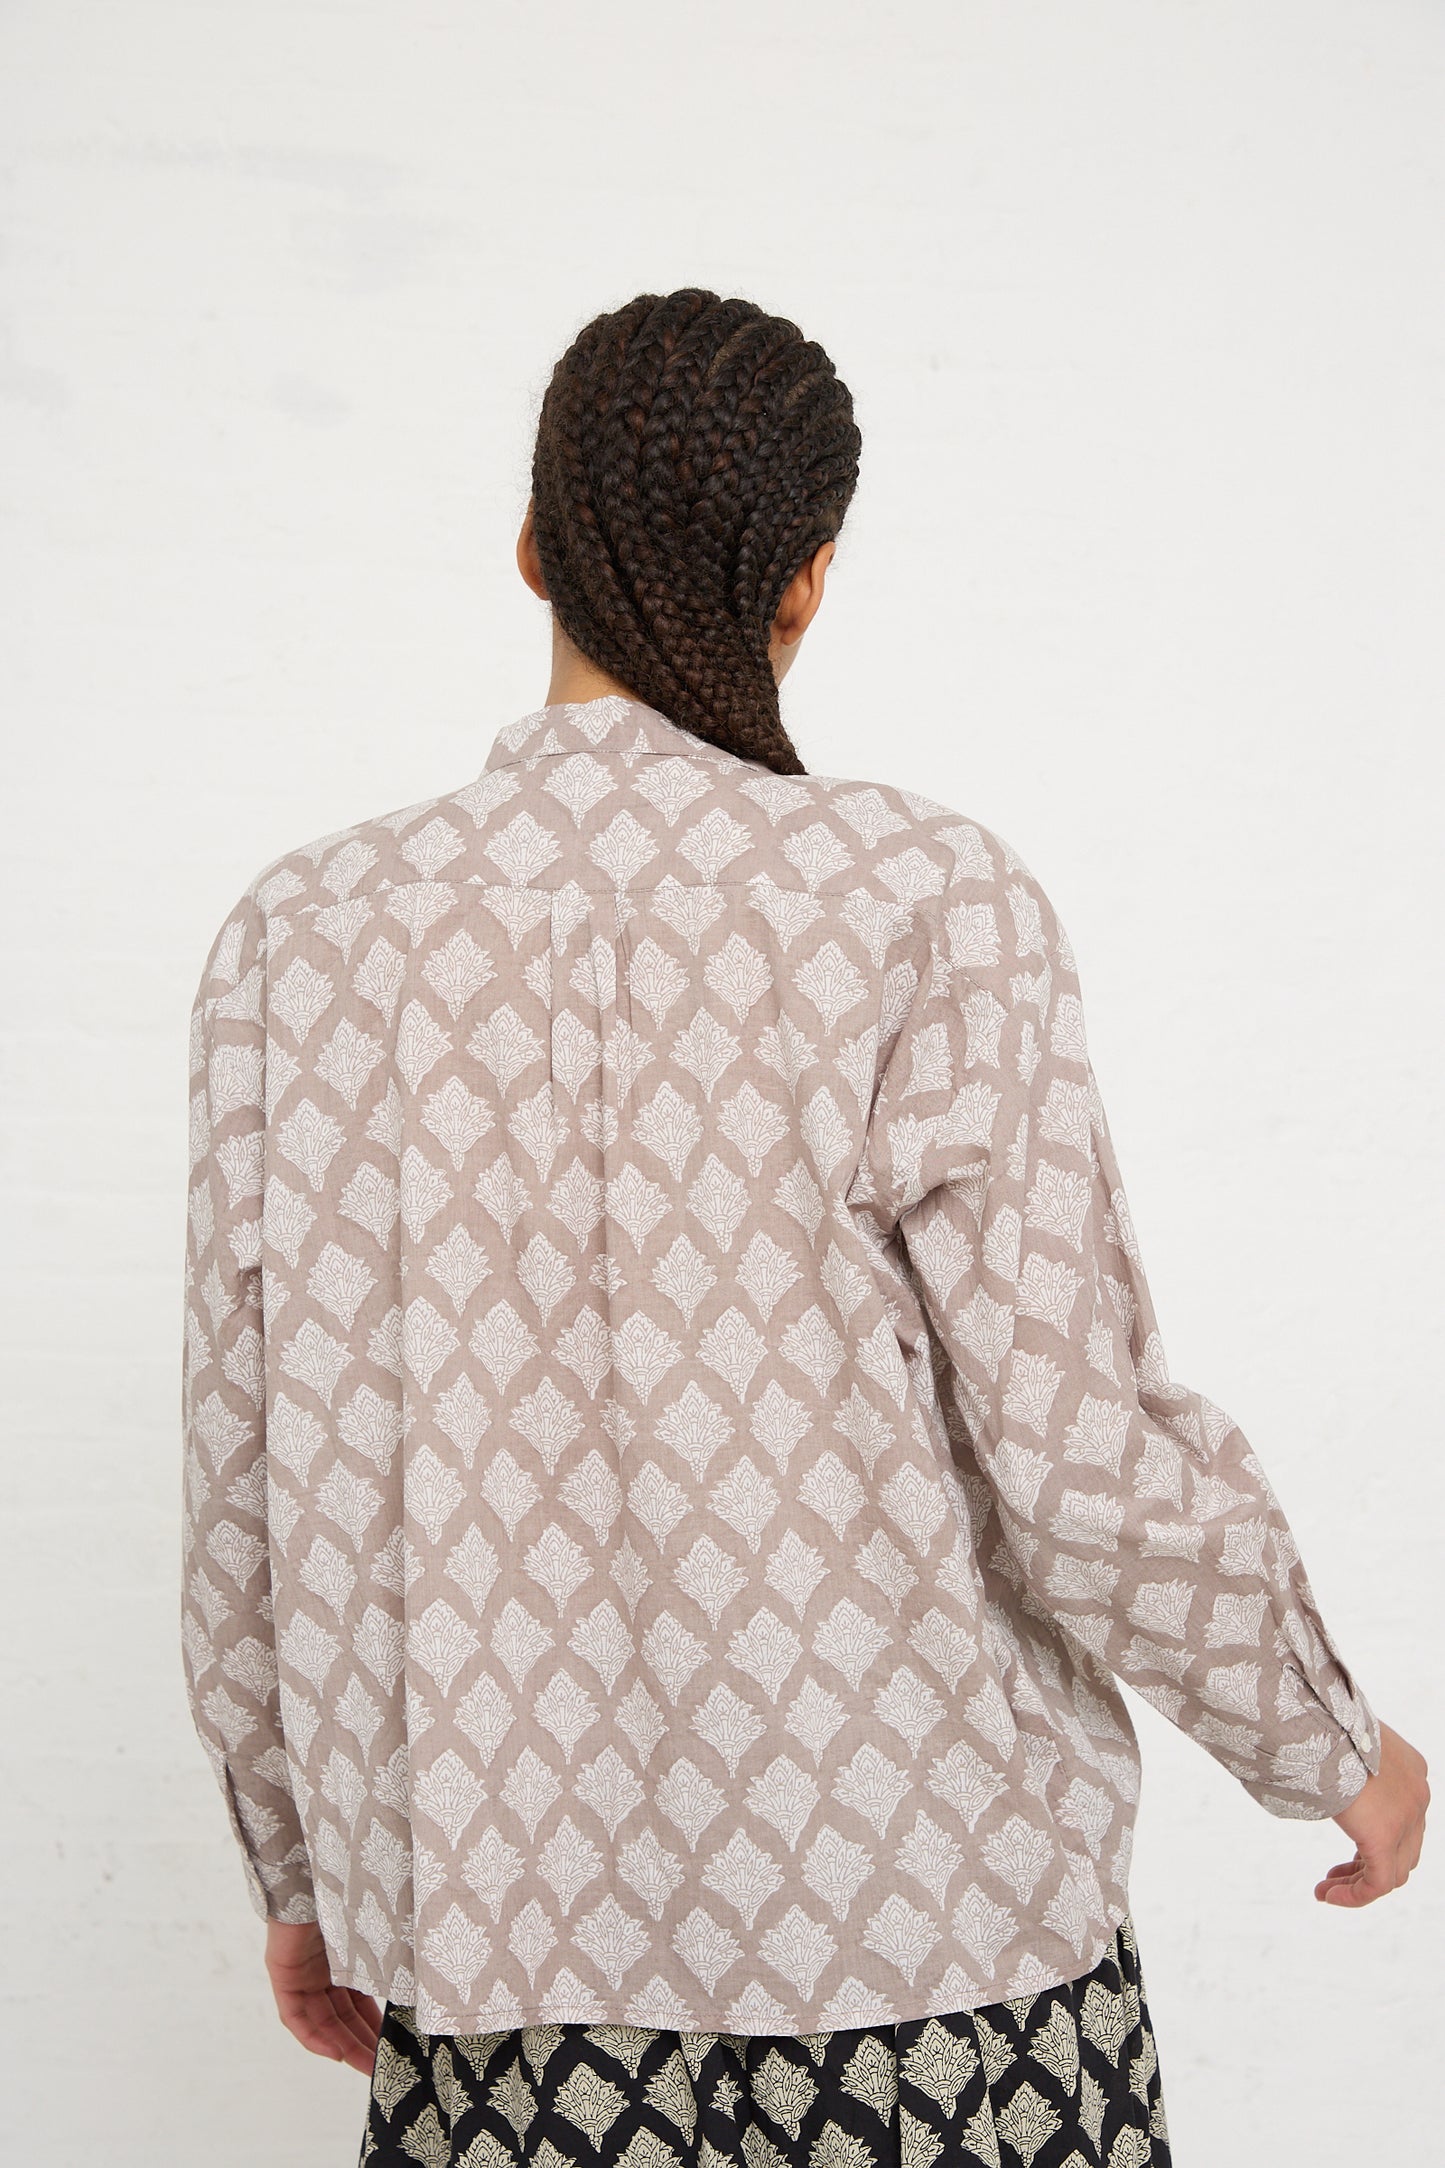 Person with braided hair wearing an Ichi Antiquités Woven Cotton Indian Block Print Shirt in Beige, photographed from behind.